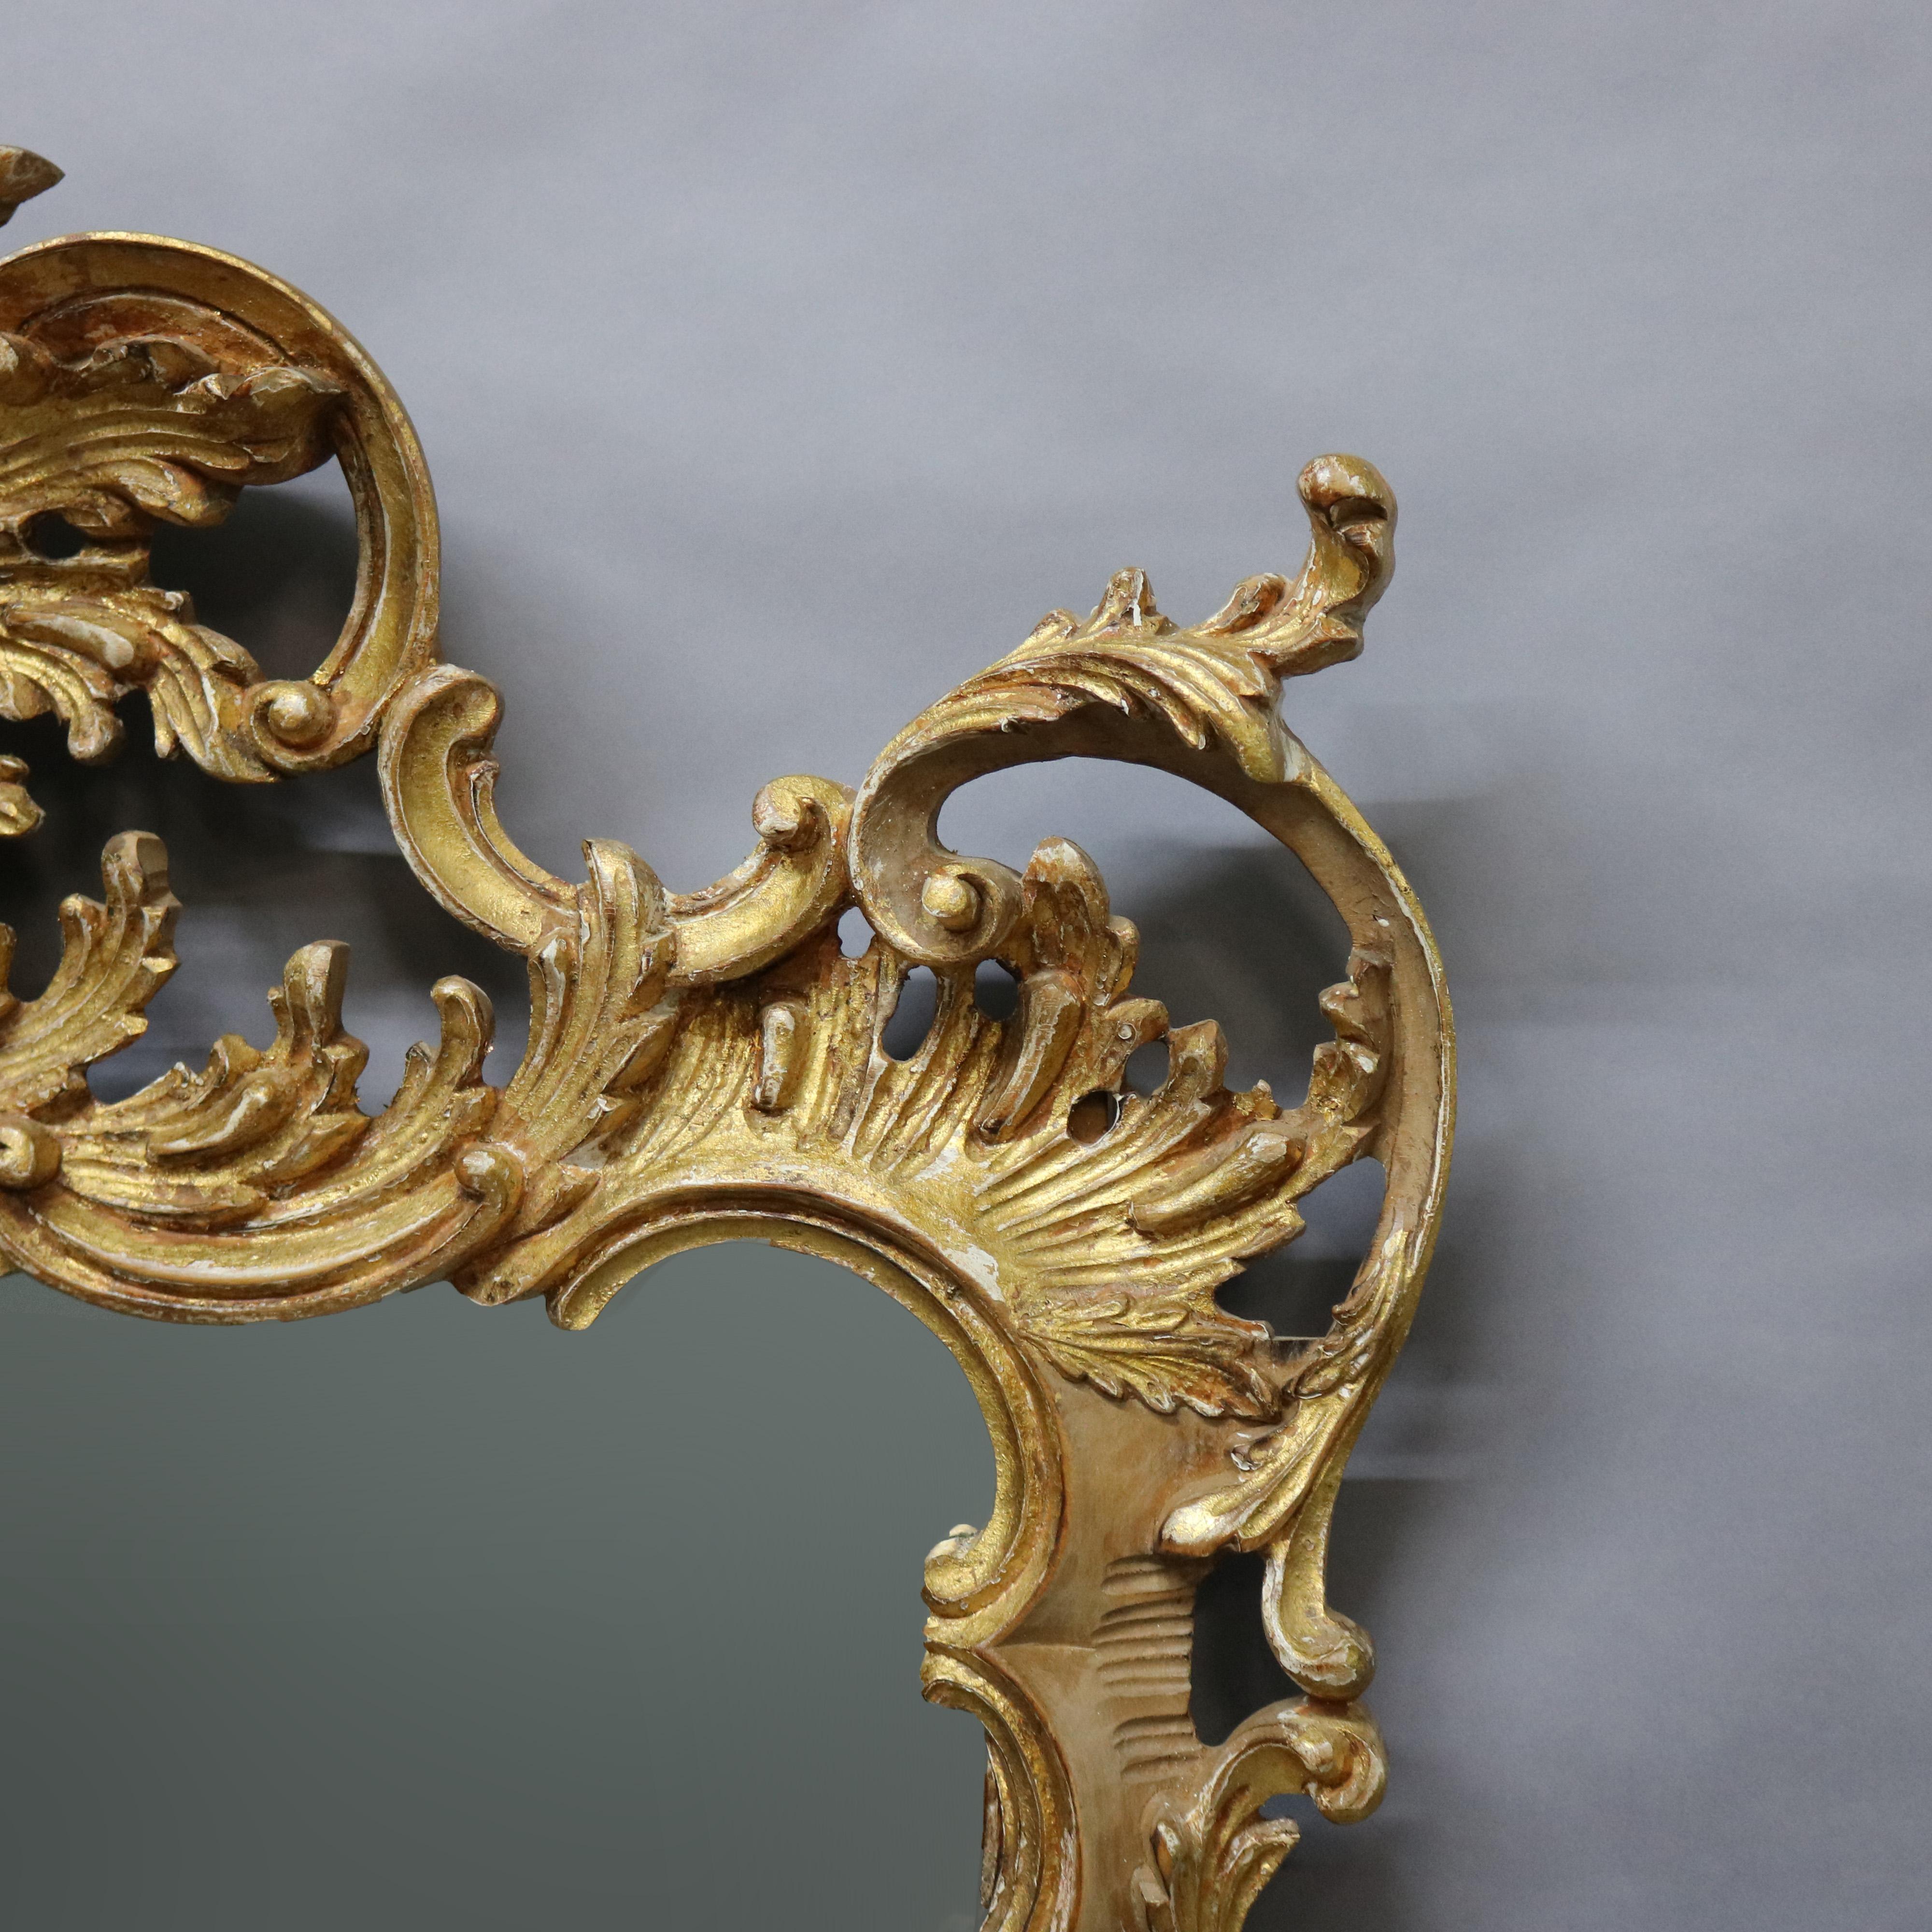 20th Century Antique Oversized Italian Rococo Revival Giltwood Over Mantel Wall Mirror 20th C